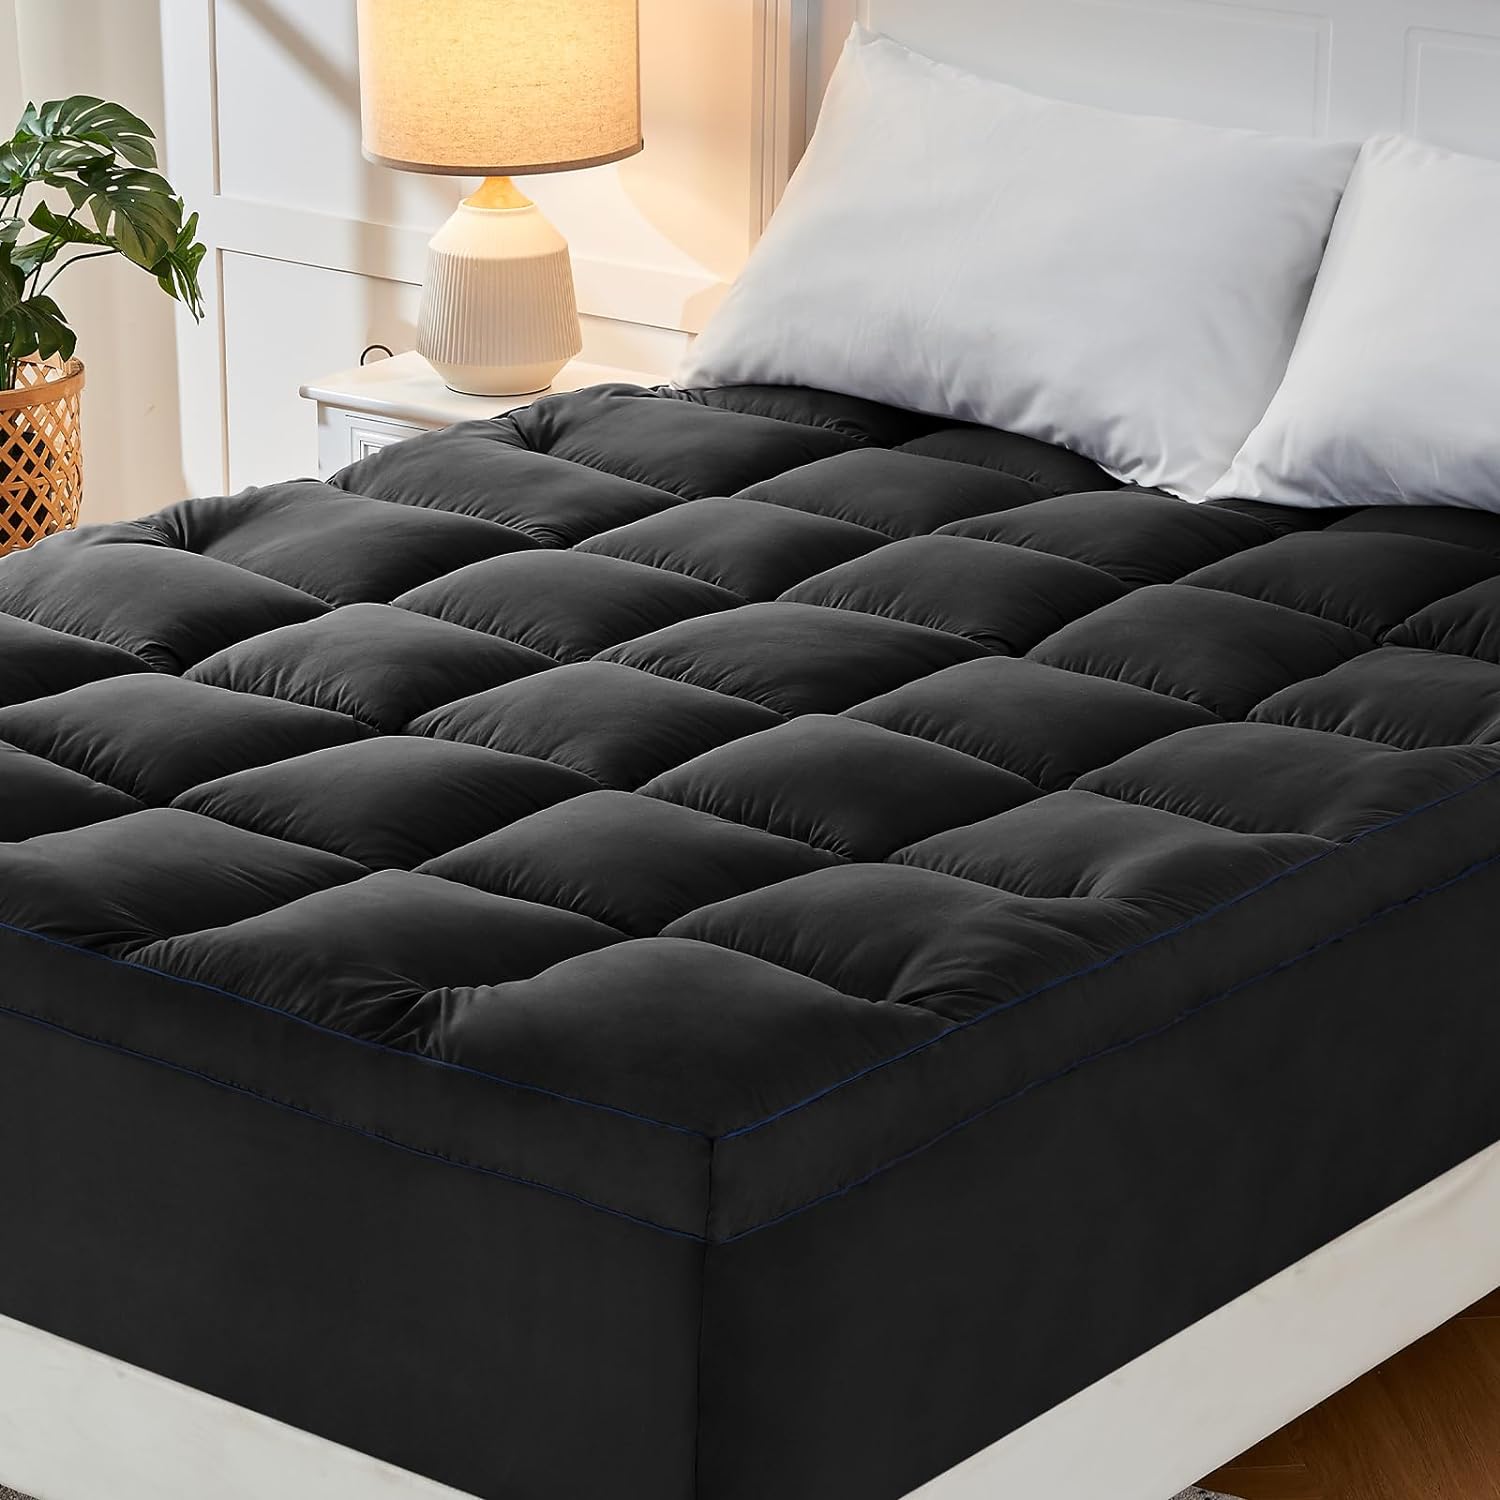 Had for over 6 months. Makes my bed feel even cozier and soft. Easy to care for. Love the deep pockets, fits perfectly on my Queen size bed - worth every penny!